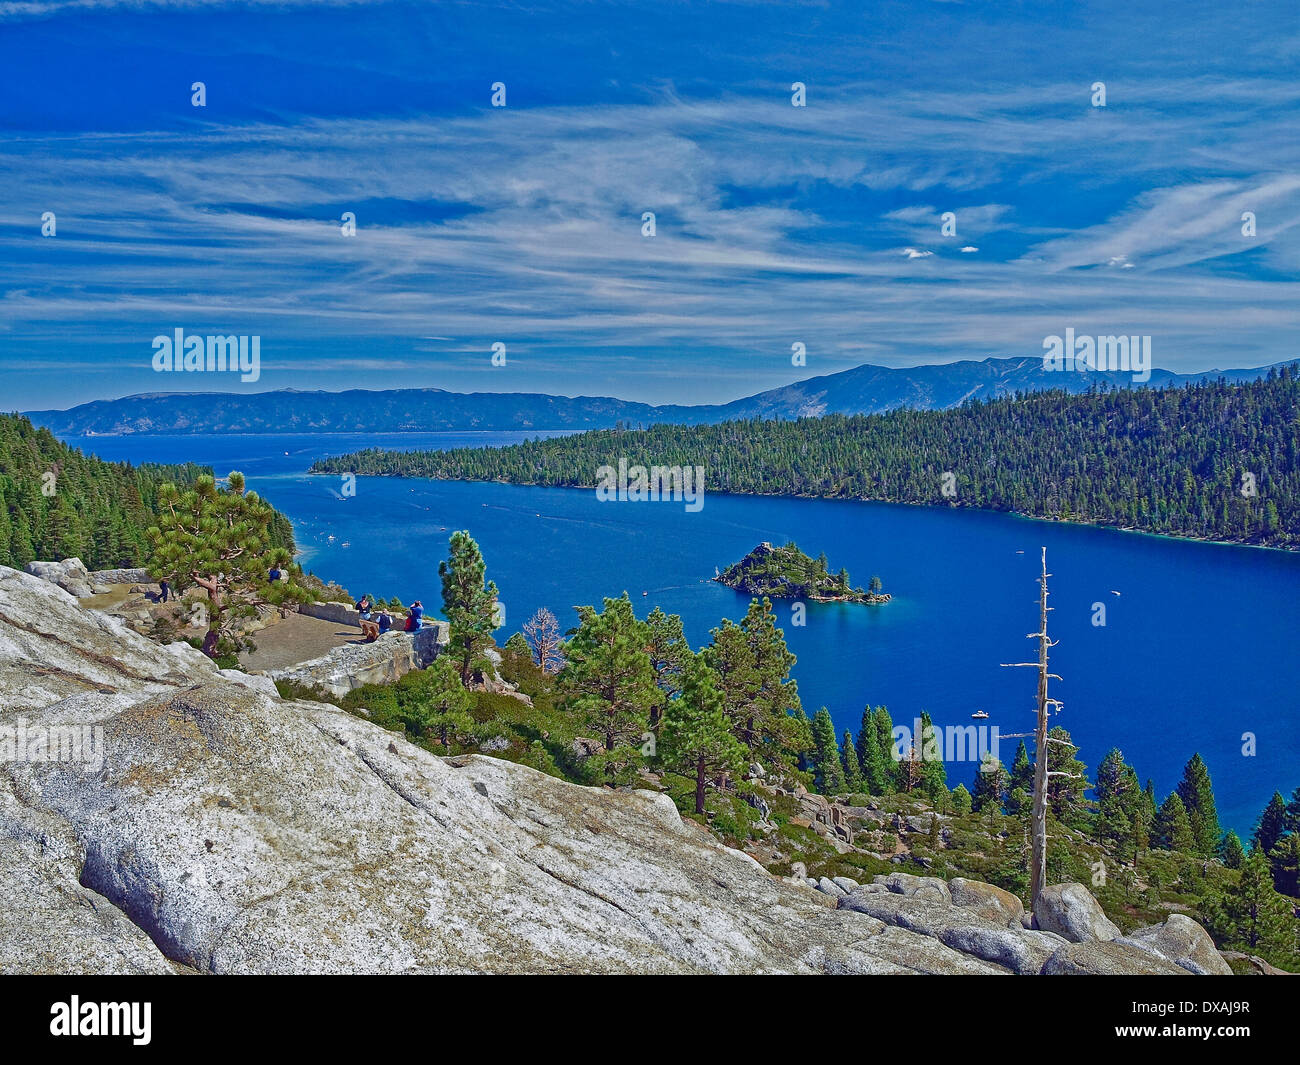 Emerald Bay and Fannette Island at Lake Tahoe, California Stock Photo